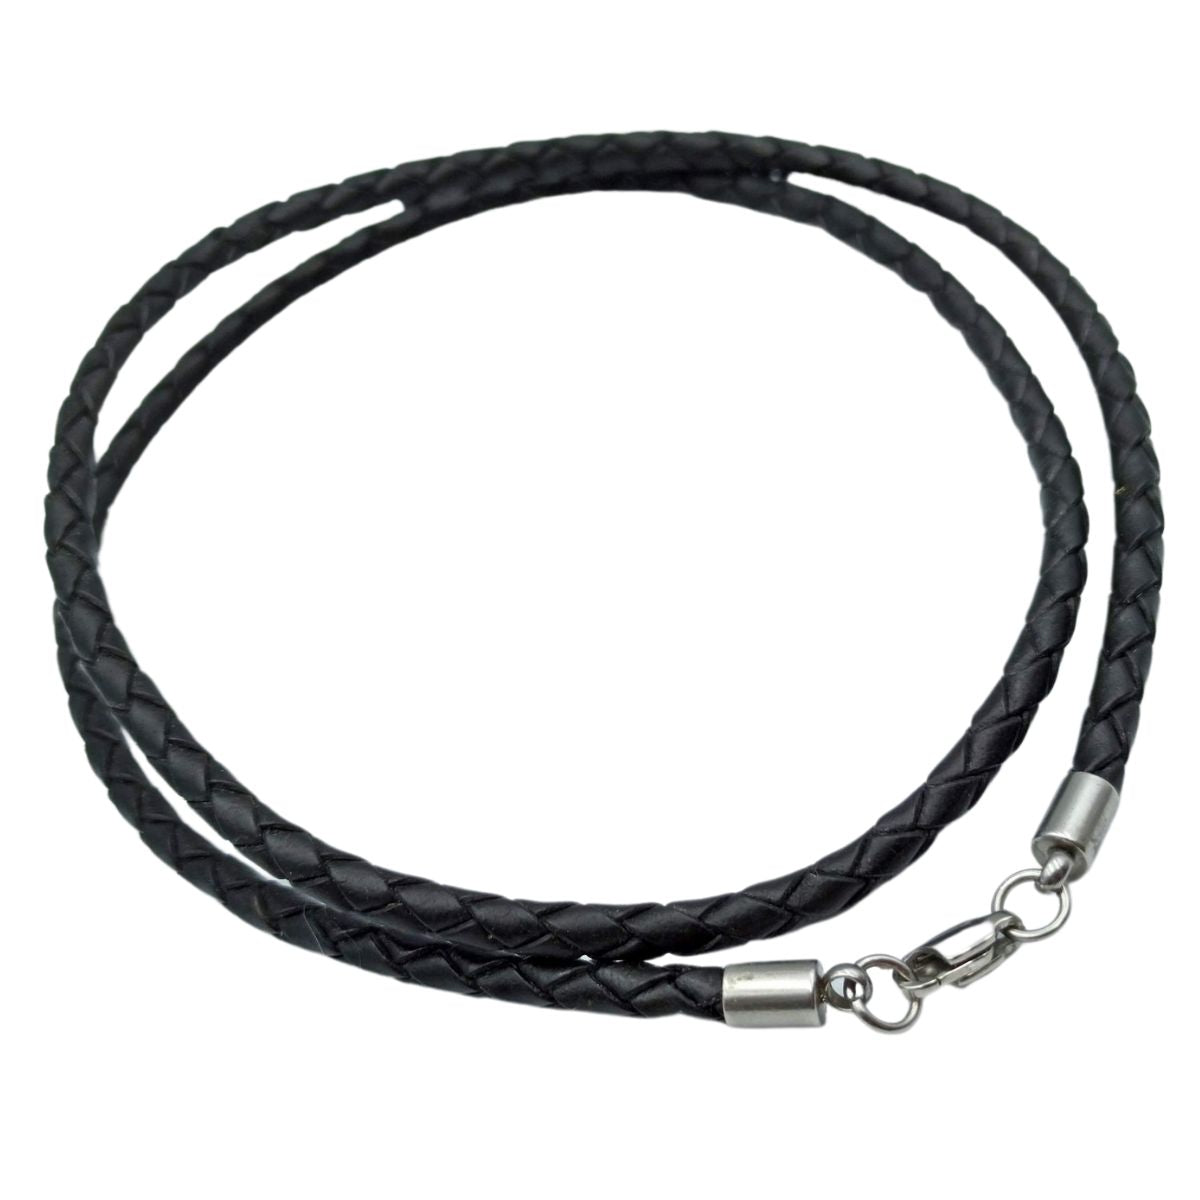 Navy Blue Vintage Braided Wax Rope Necklace Antique Style Leather Necklace  With Pendant For Mens Punk Trend Jewelry From Zhang006, $1.5 | DHgate.Com